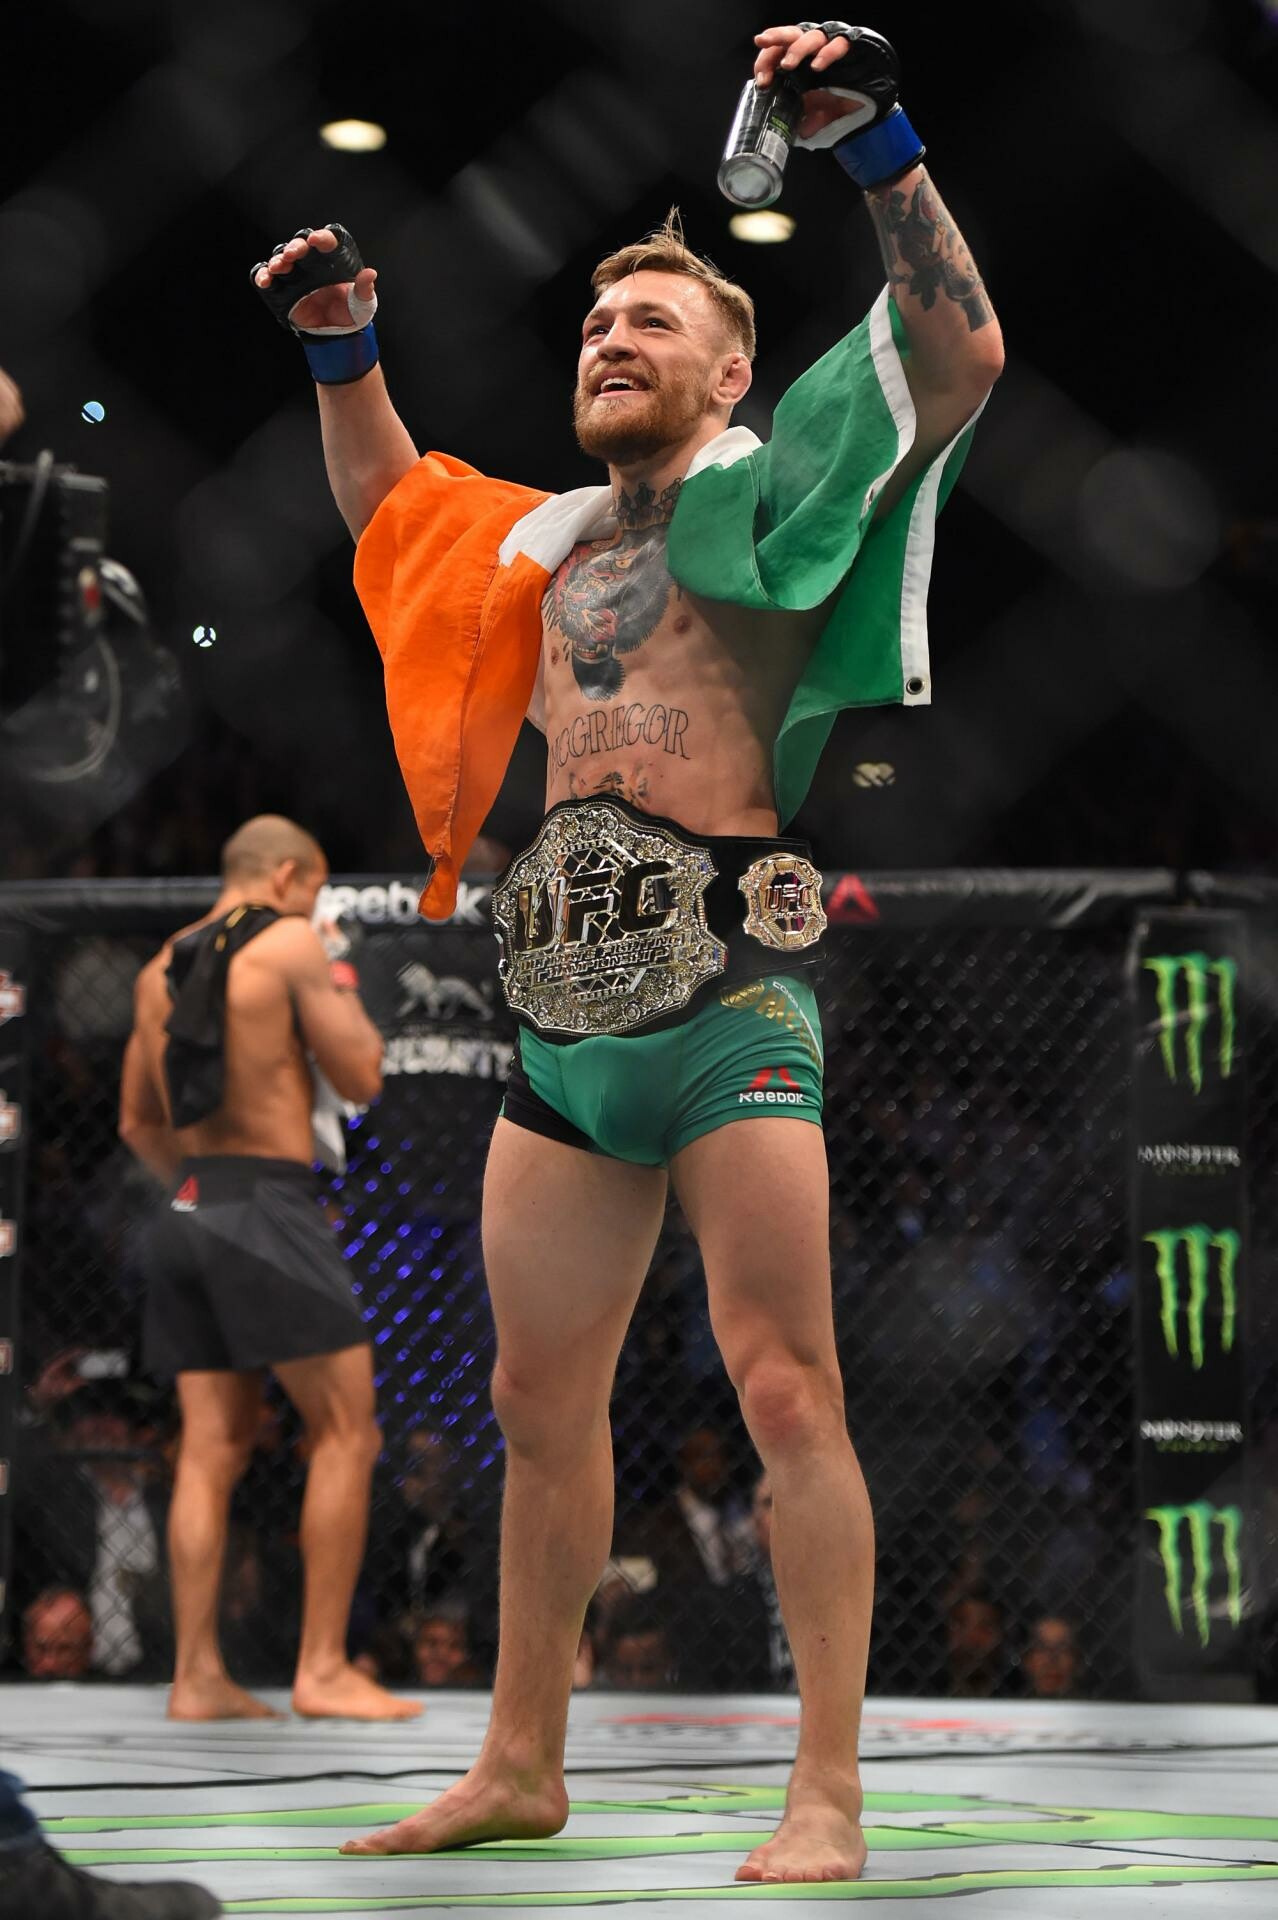 Conor McGregor: He lost to Dustin Poirier via technical knockout at UFC 257 on 24 January 2021. 1280x1920 HD Background.